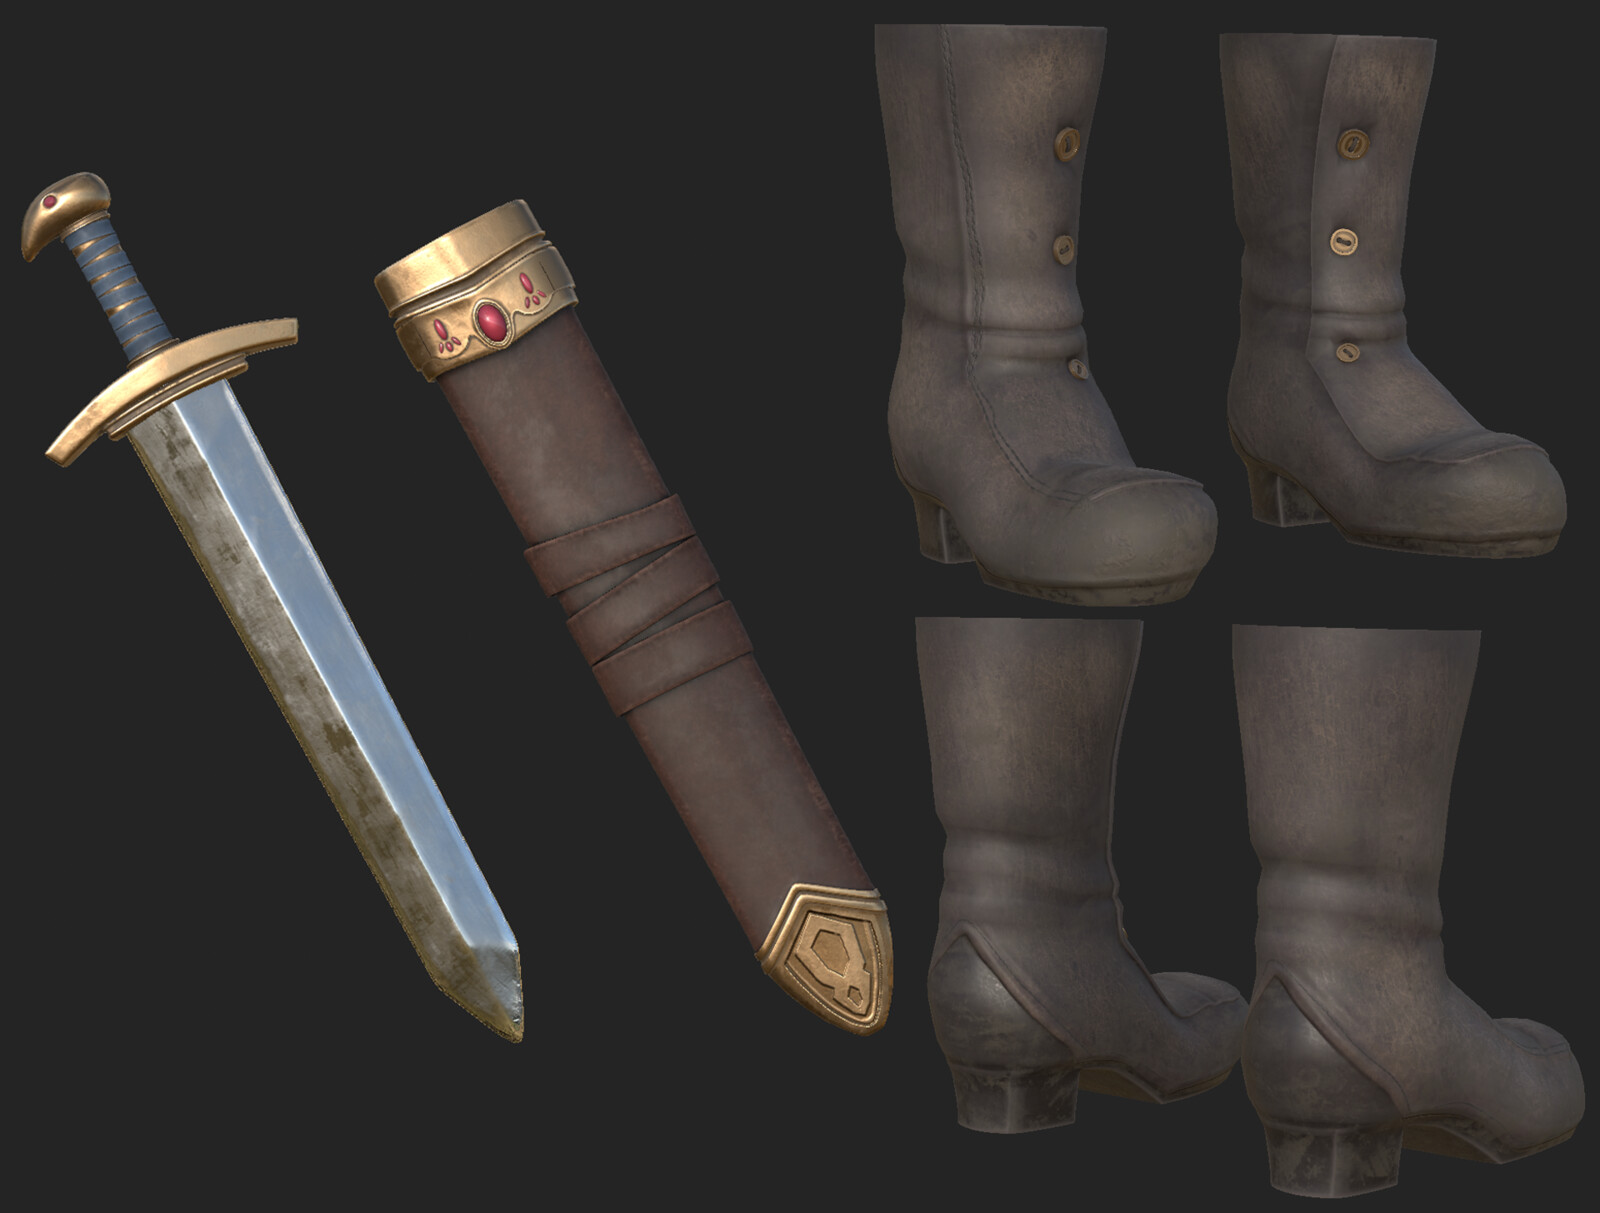 Closeups of the boots and sword.